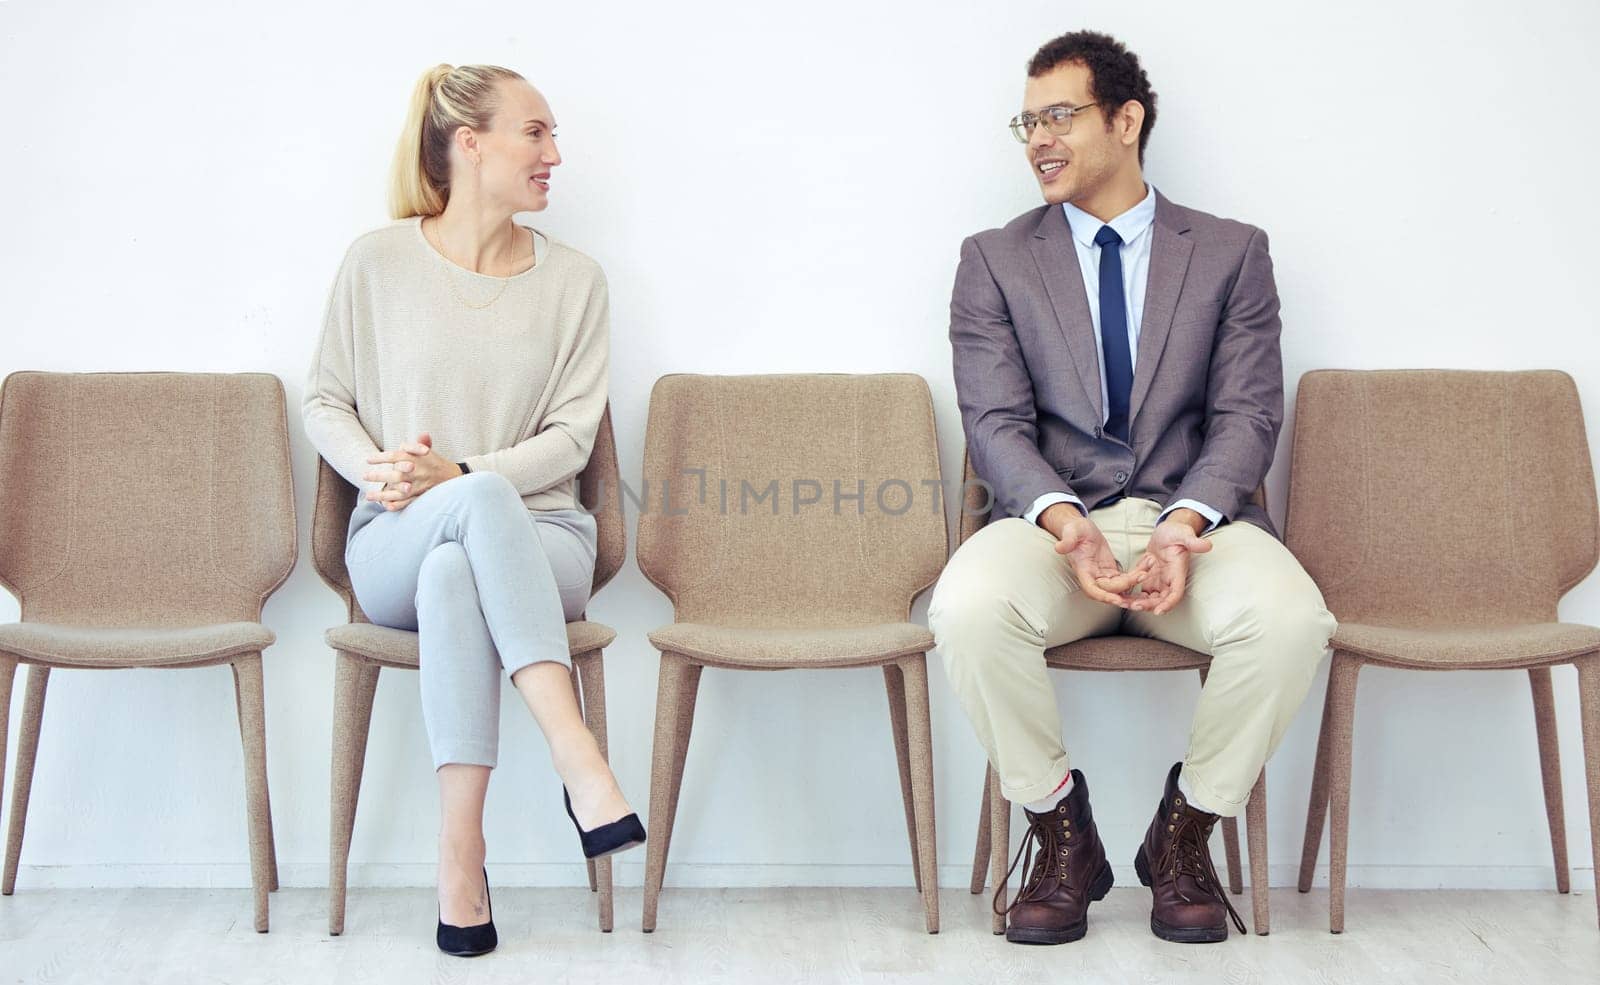 Conversation, row and people for business interview and waiting for meeting with hr, communication and talking. Man, woman and sitting for recruitment or hiring by corporate company and appointment